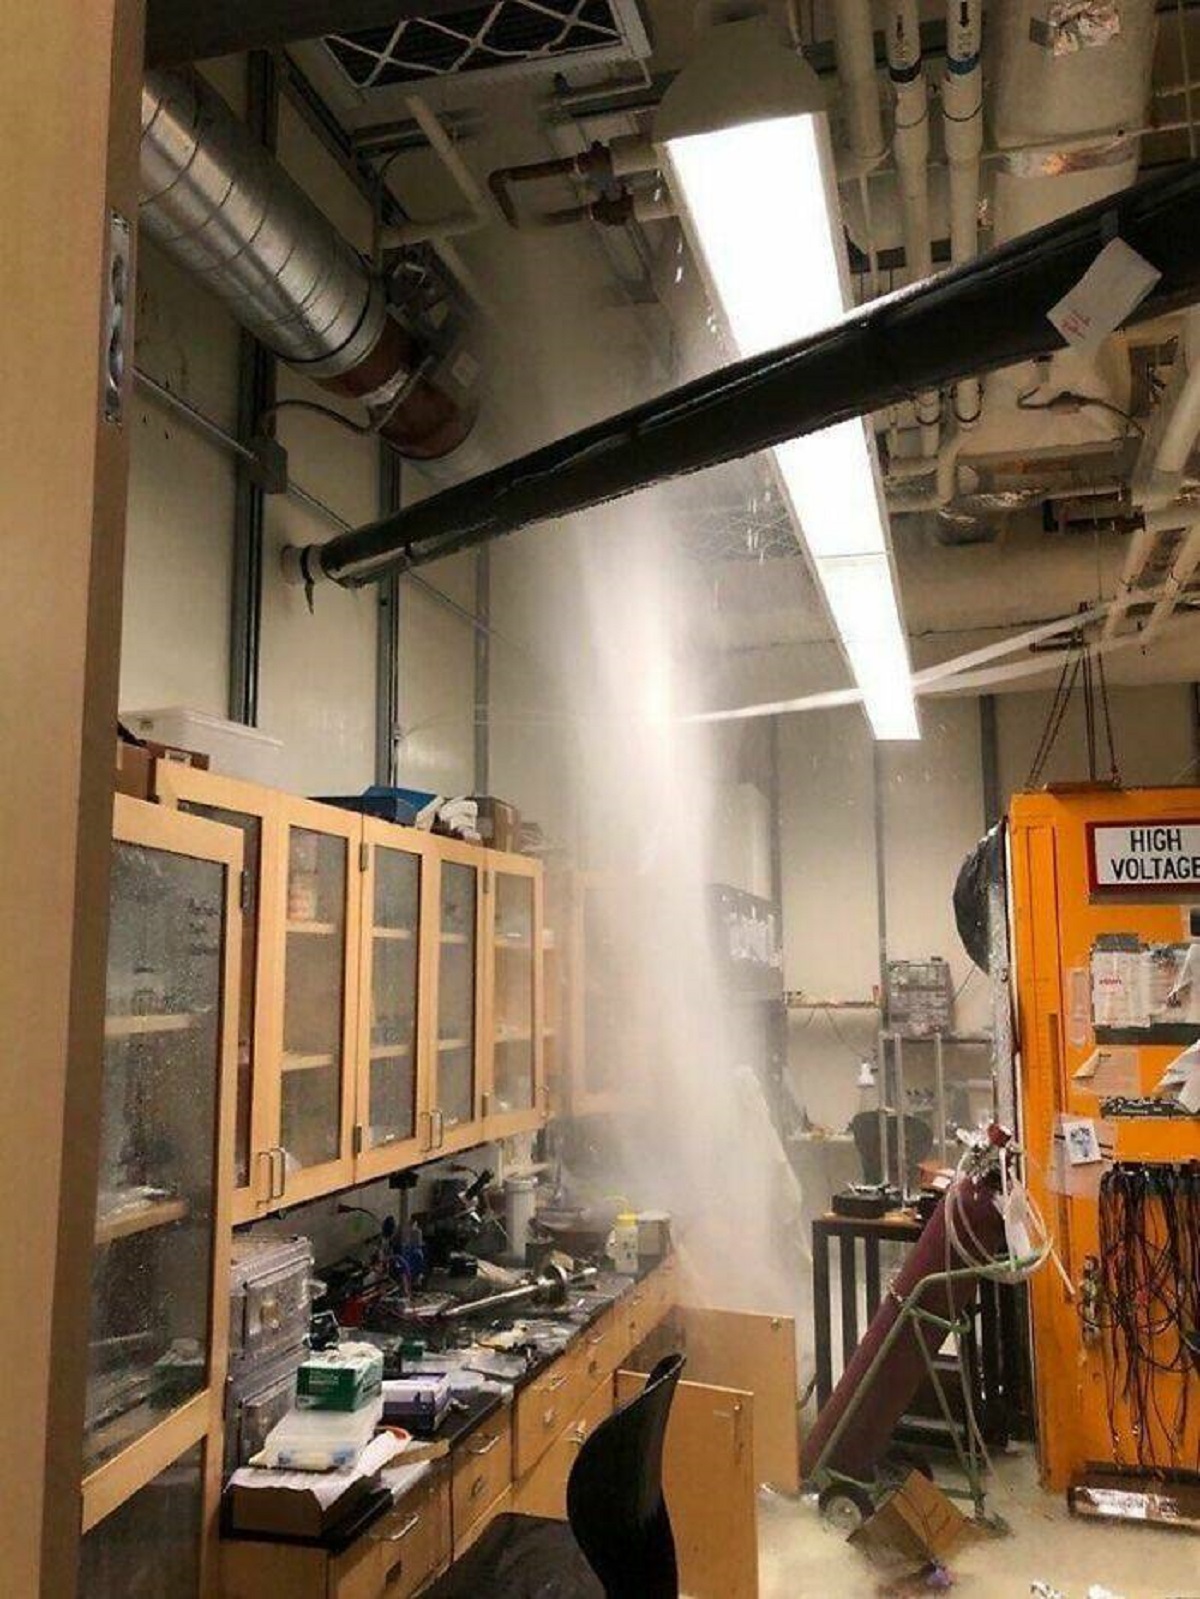 "Had A Leak Develop In Our Laboratory This Morning. Nobody Was On Campus To Catch It So There Was 4 Inches Of Standing Water And Countless Ruined Pieces Of Equipment"